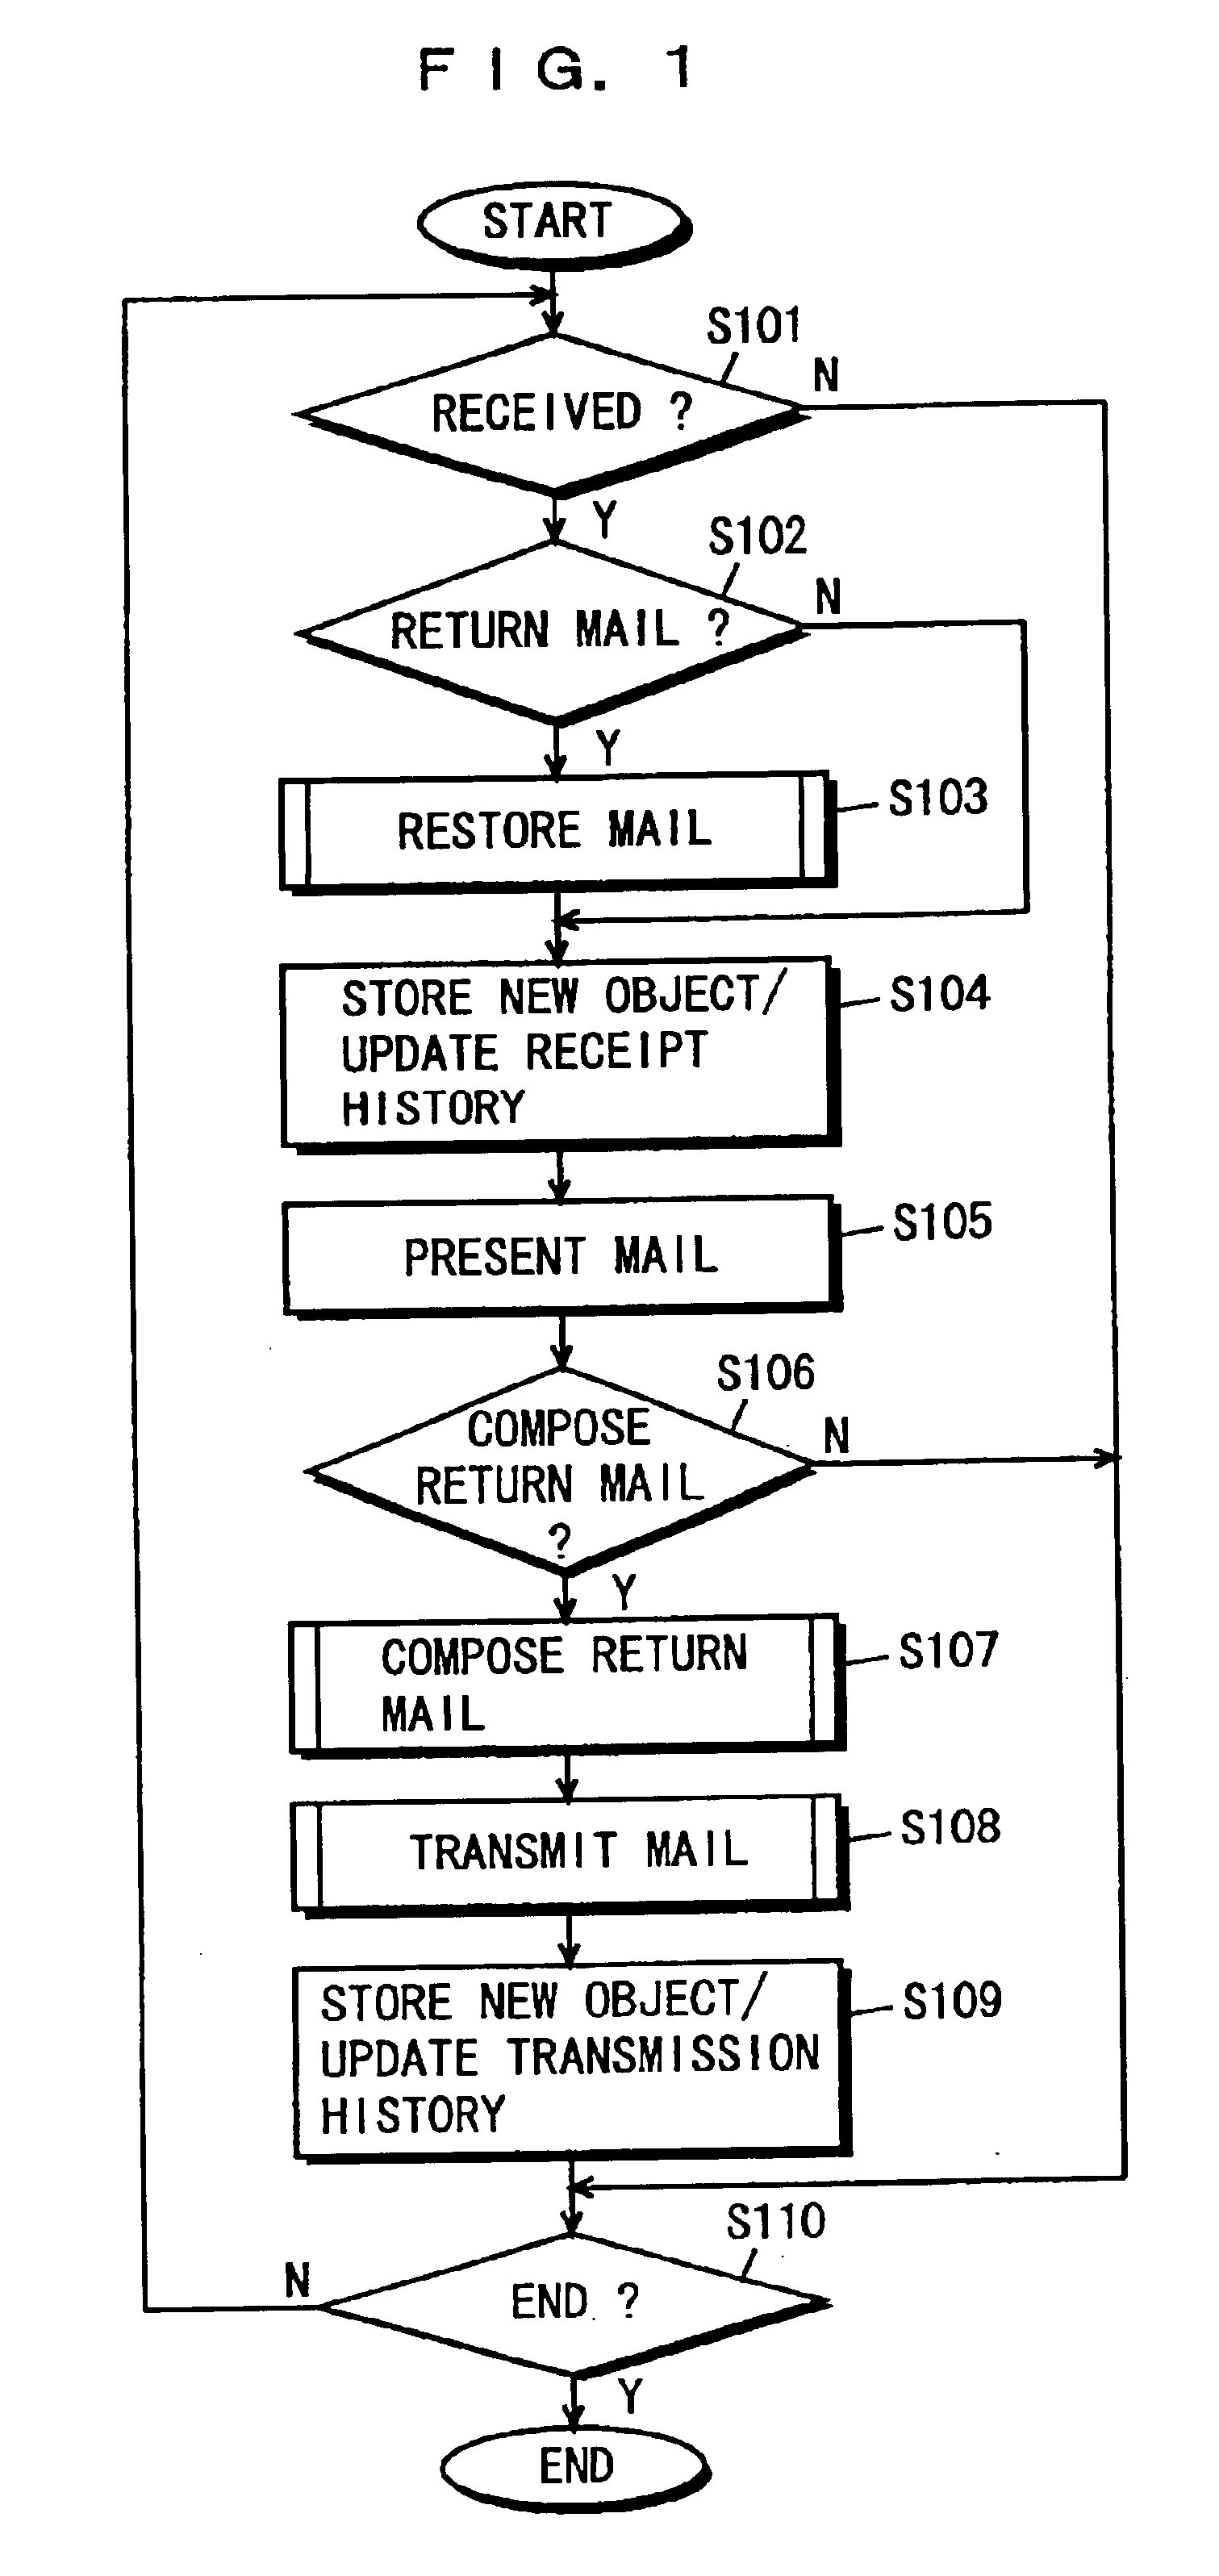 Multi-media E-mail system and device for transmitting a composed return E-mail